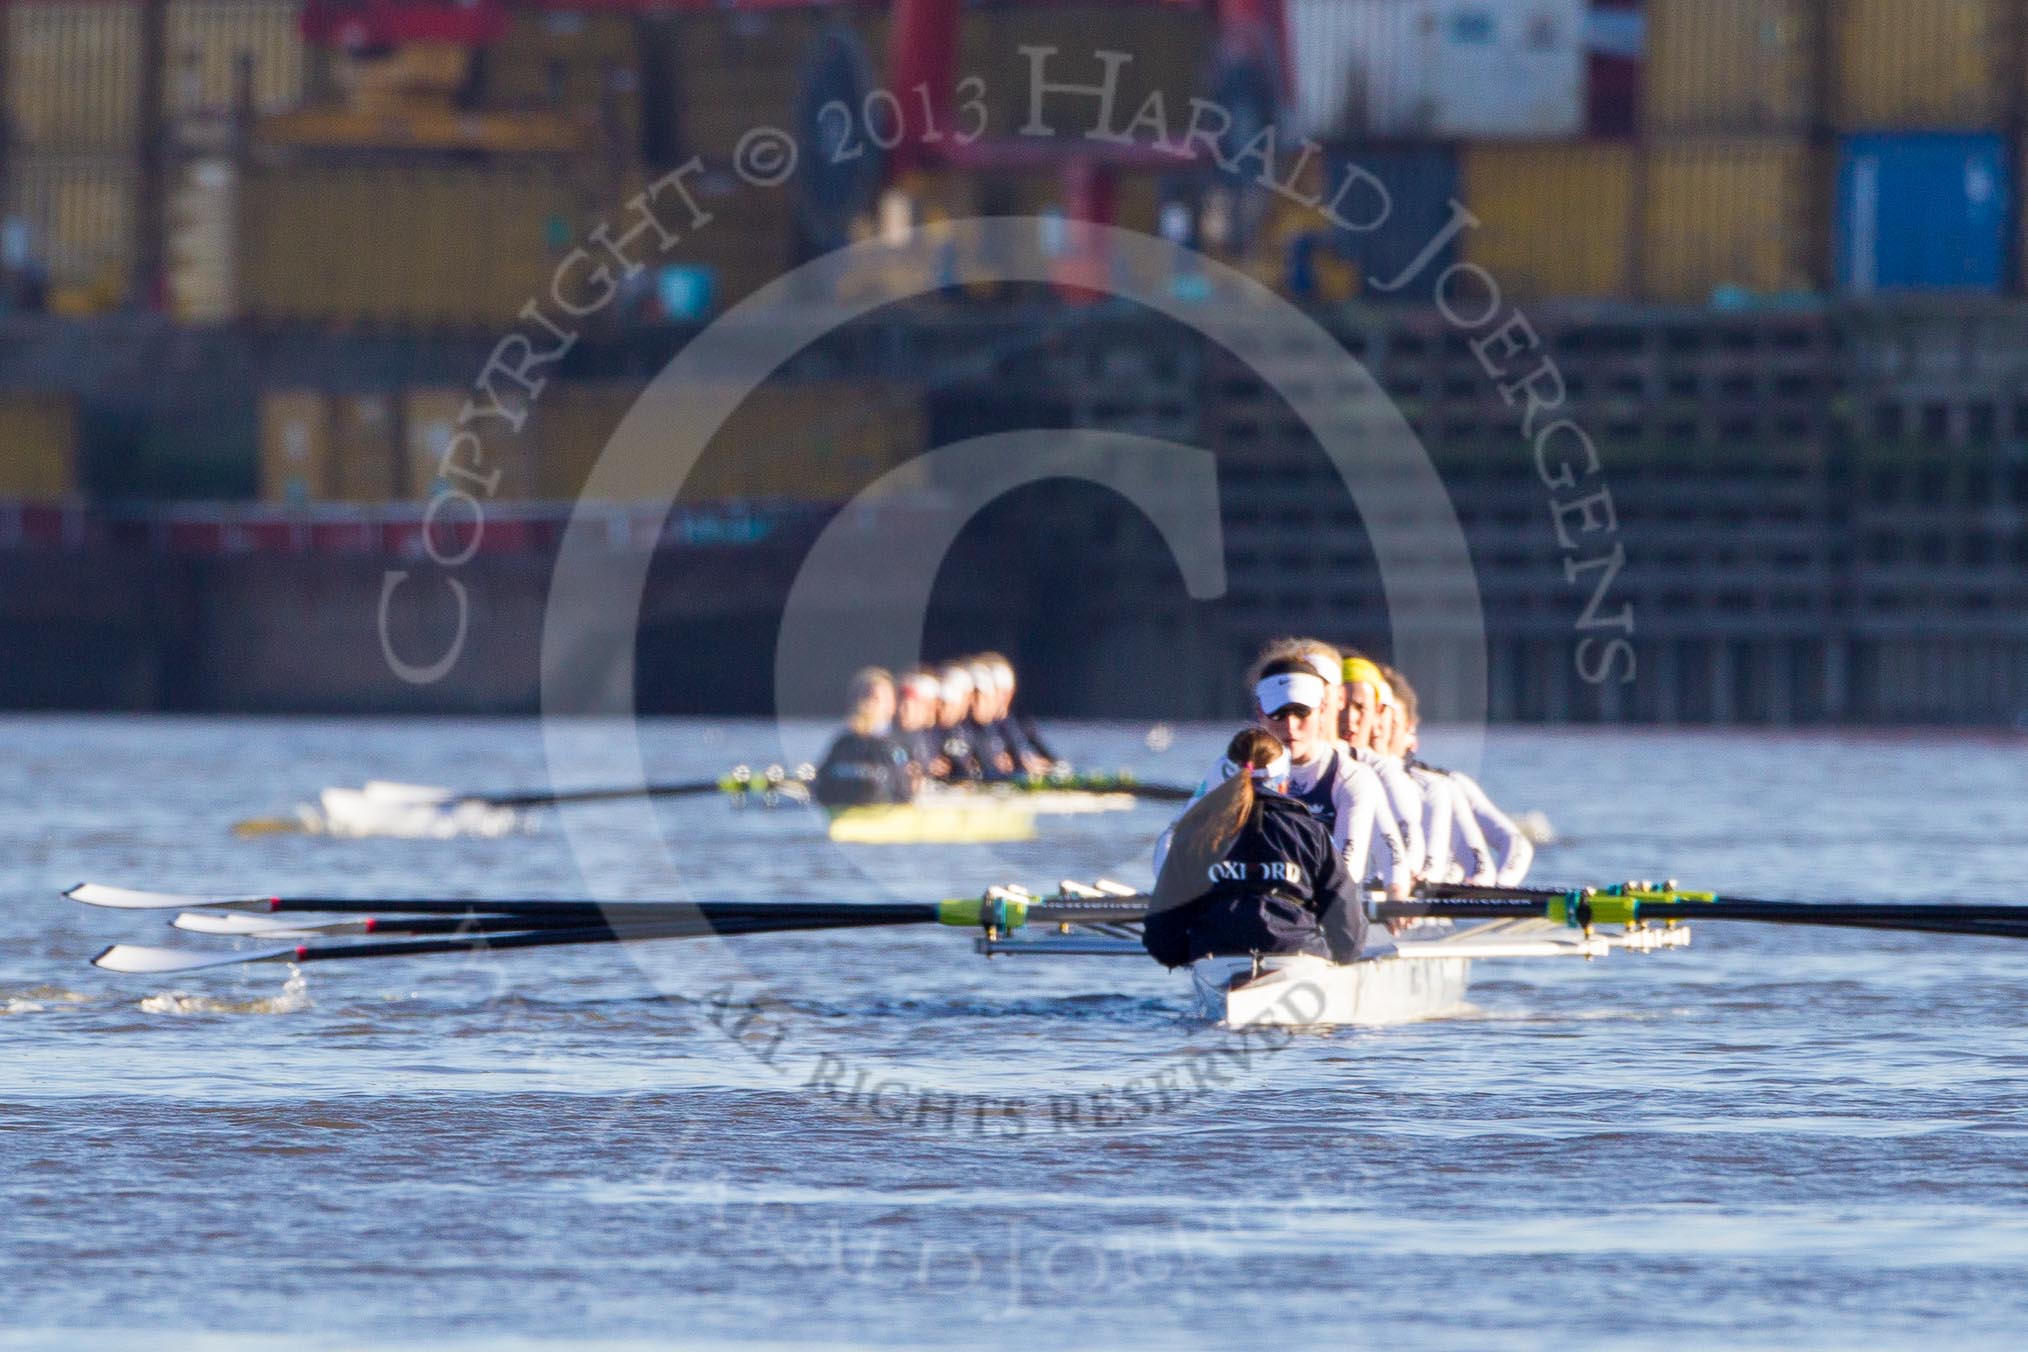 The Boat Race season 2014 - Women's Trial VIIIs (OUWBC, Oxford): The two OUWBC boats - Cleopatra, white, in focus..
River Thames between Putney Bridge and Mortlake,
London SW15,

United Kingdom,
on 19 December 2013 at 12:23, image #2